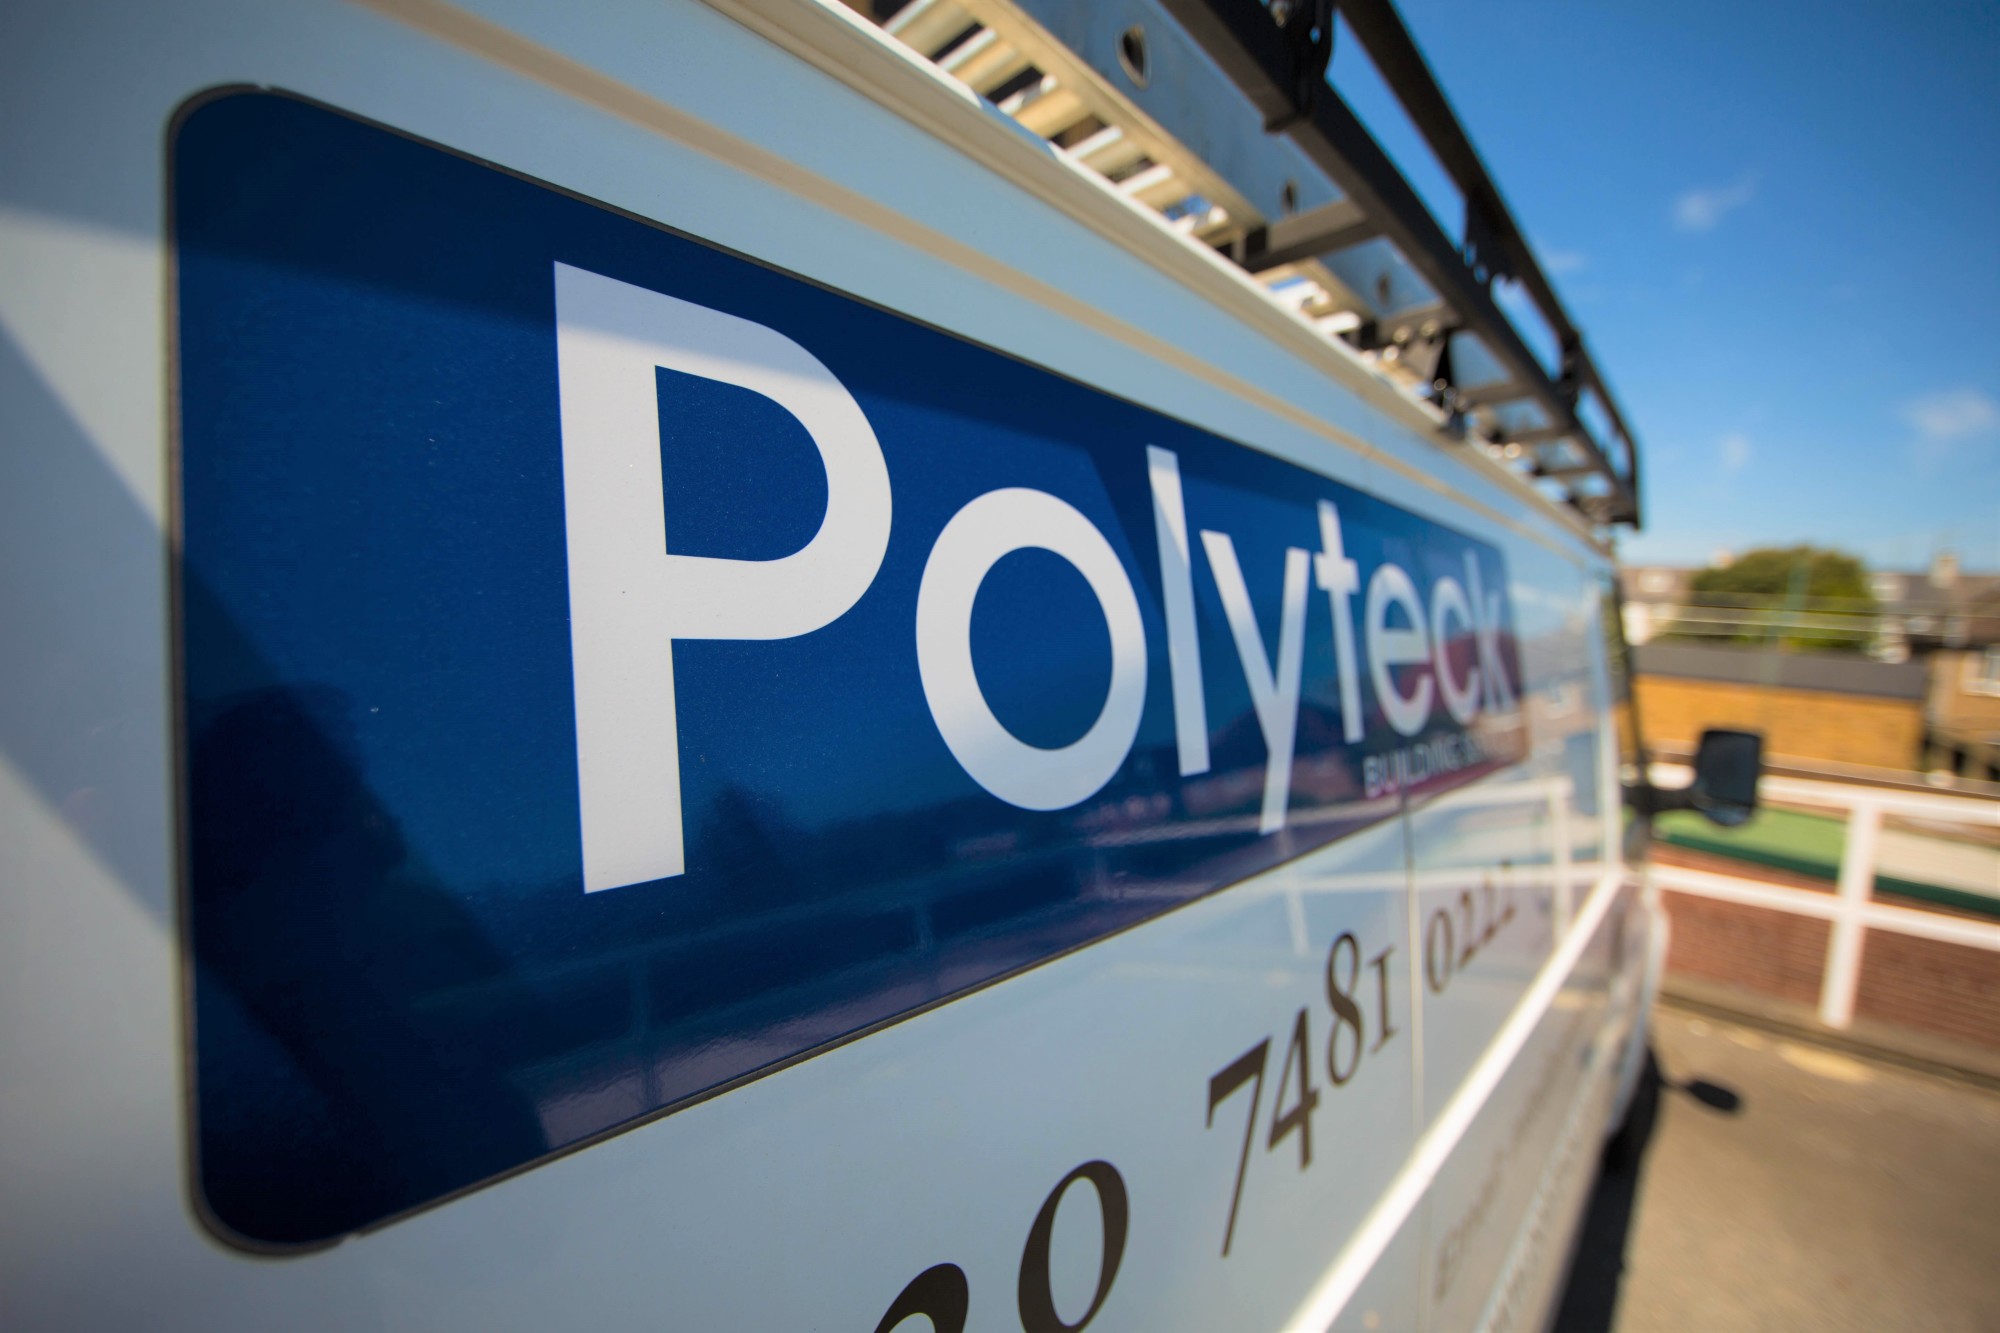 The Polyteck Group is both a construction and facilities management business.